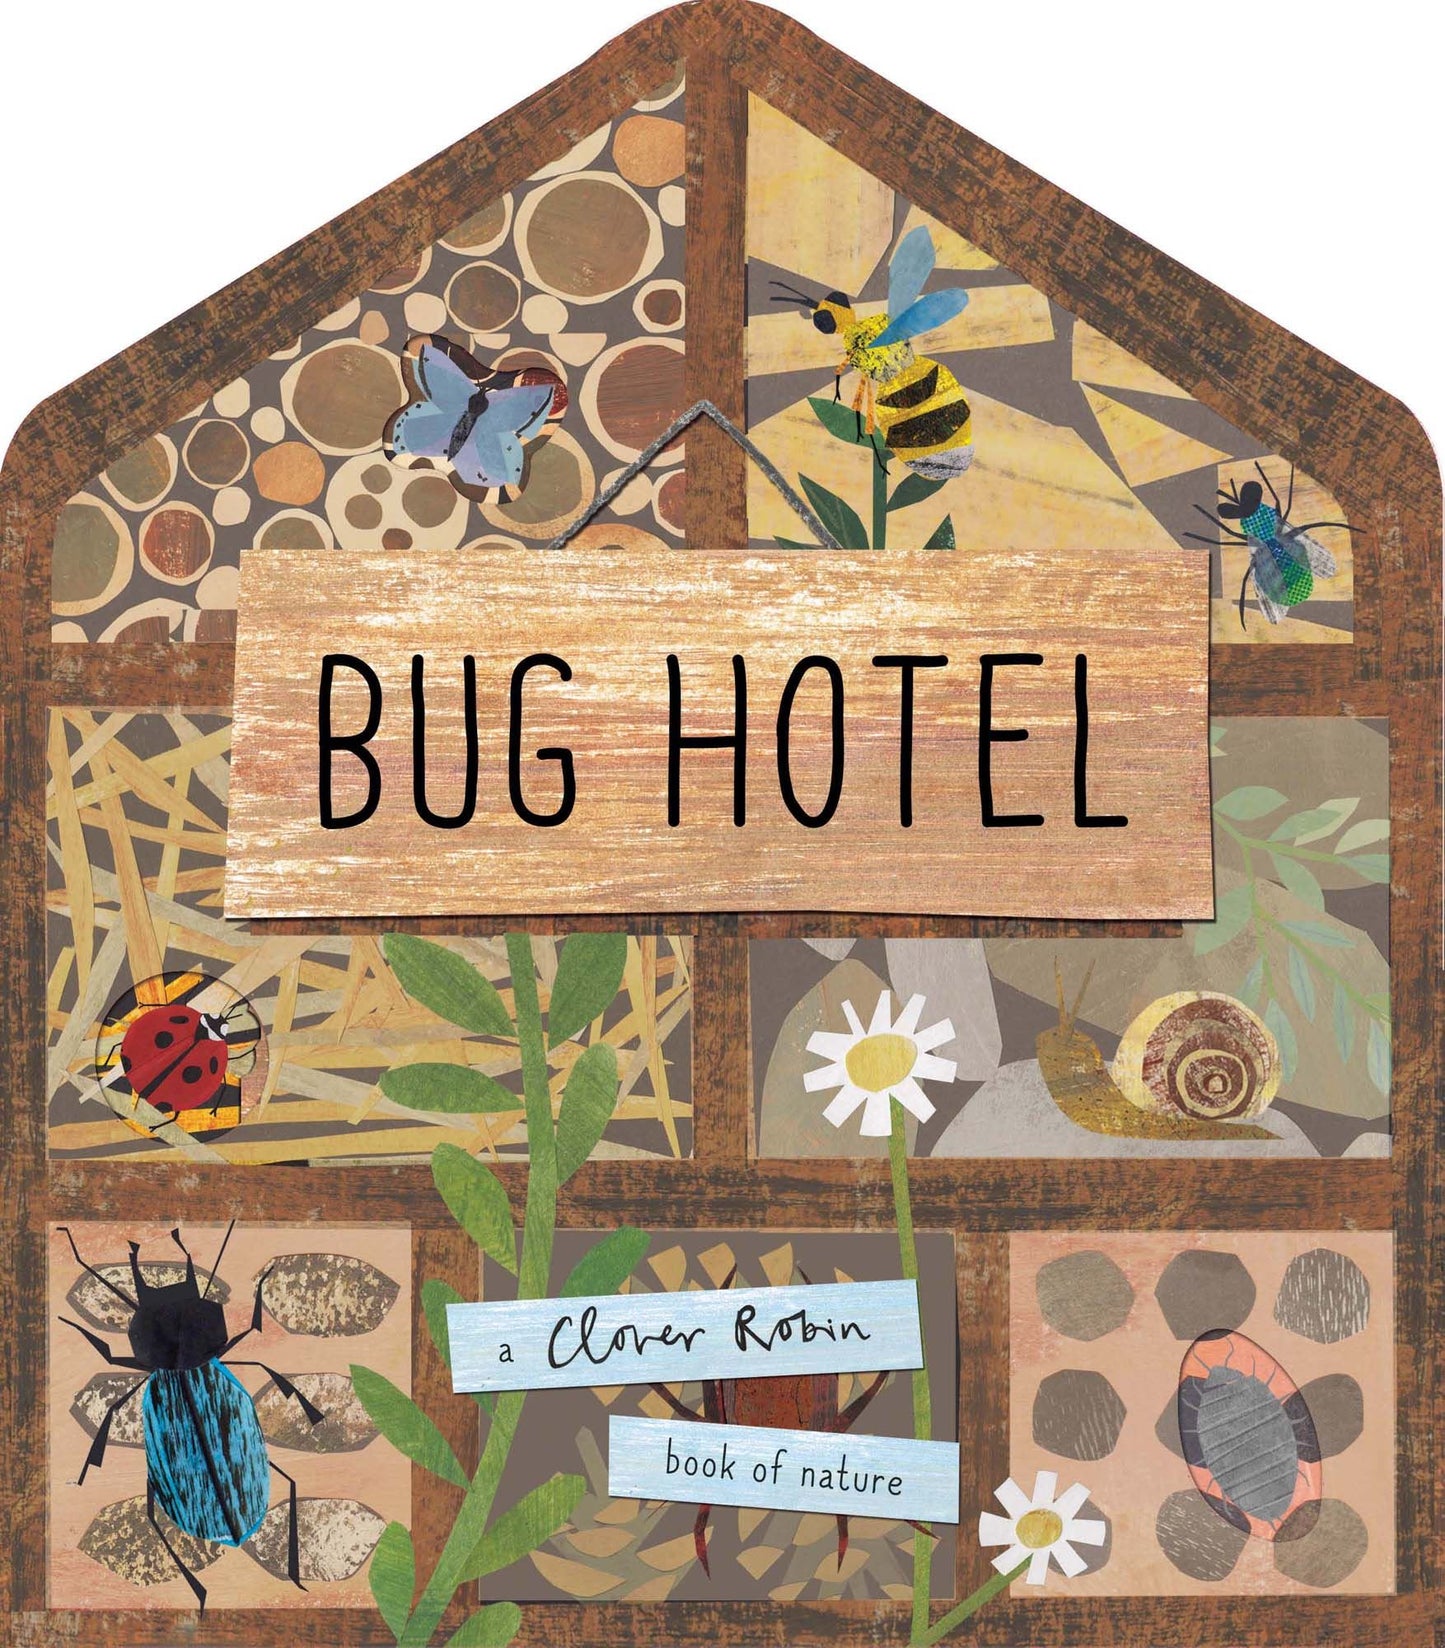 Bug Hotel - Lift The Flap Book